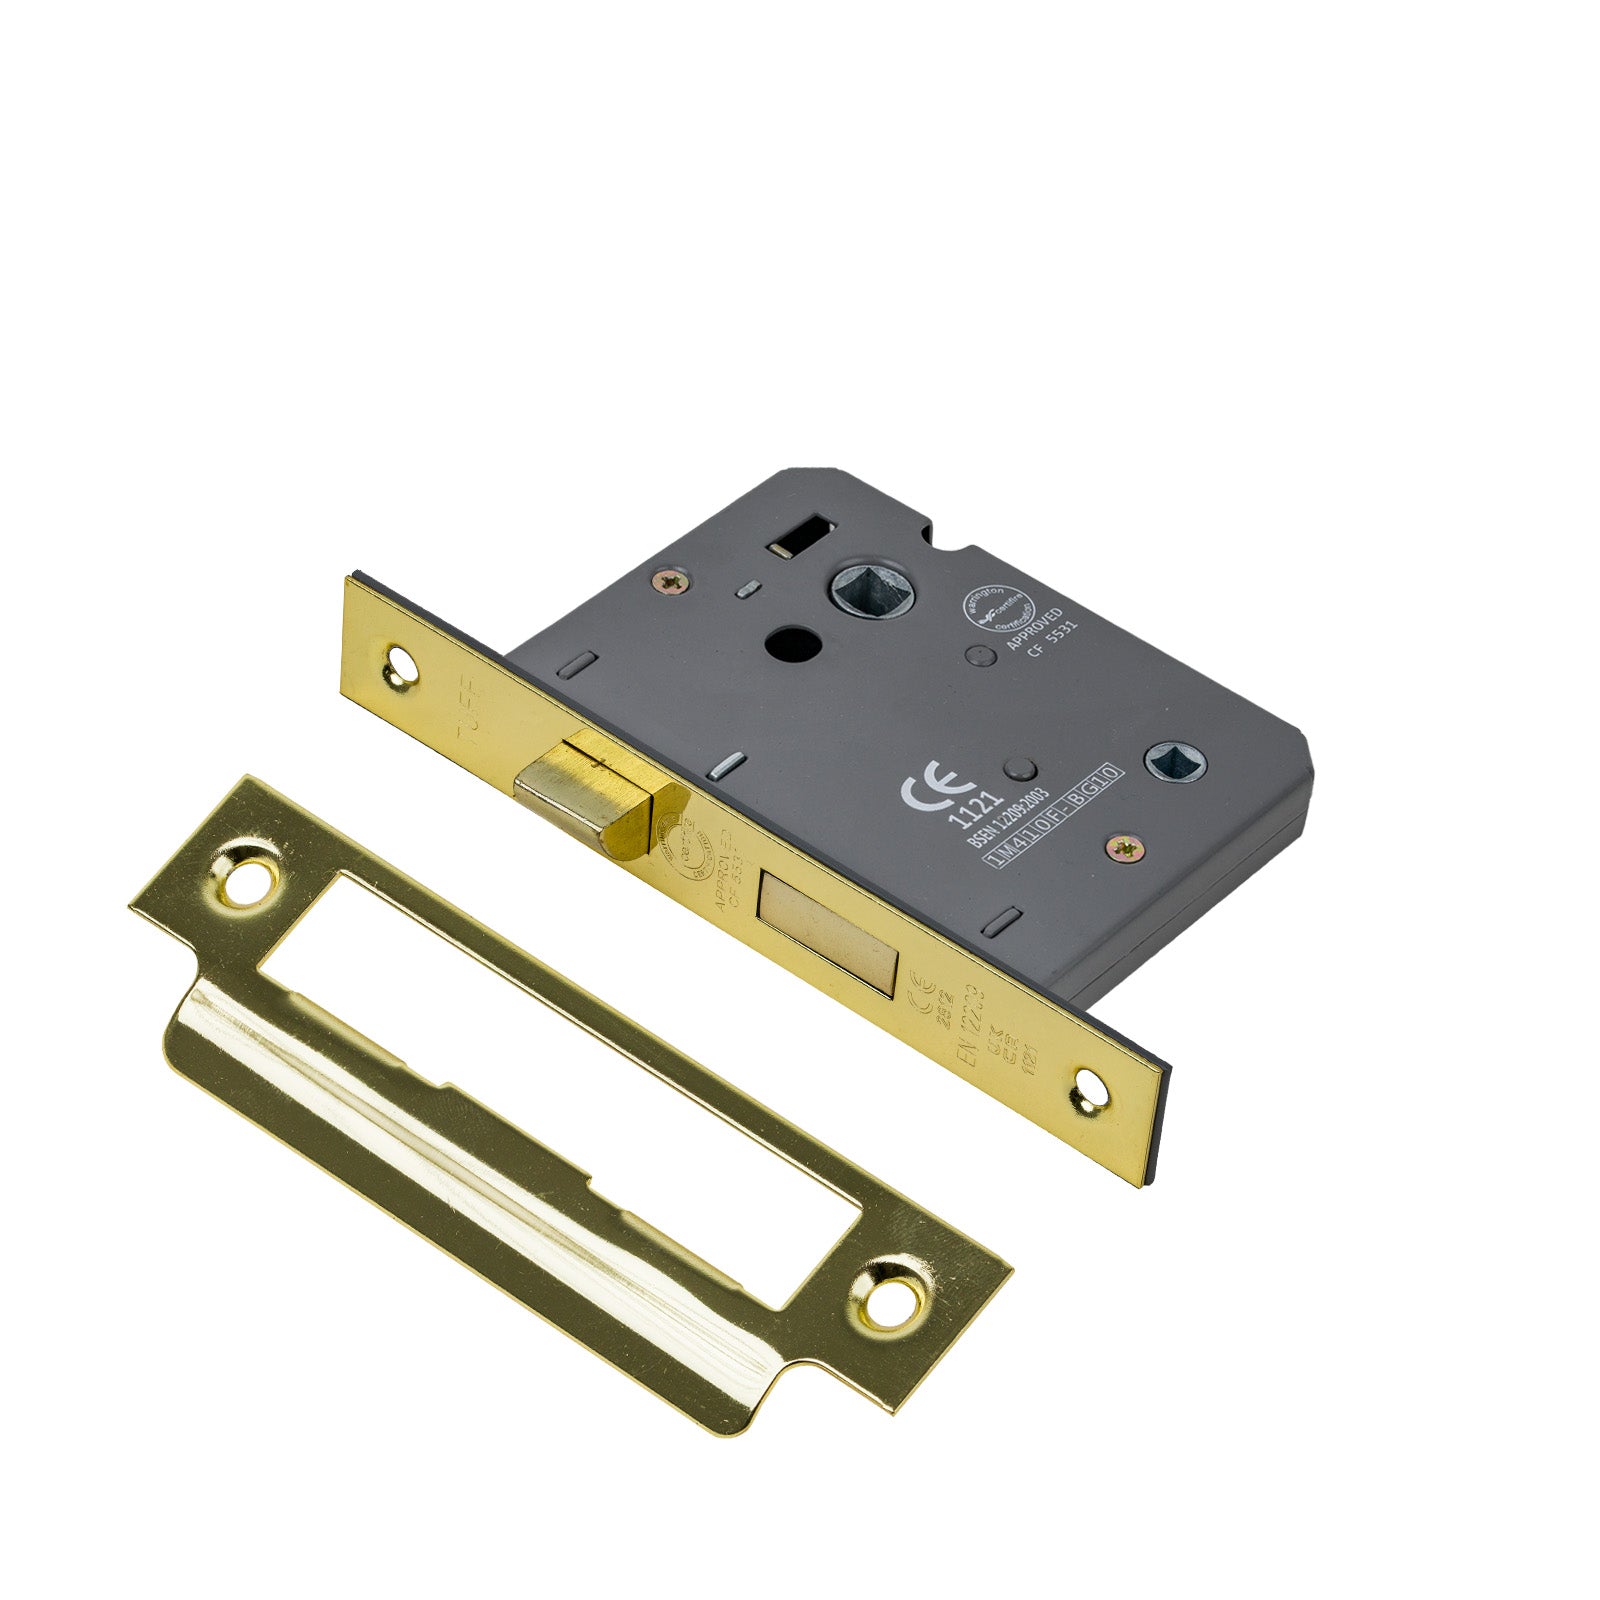 SHOW Bathroom Sash Lock - 3 Inch with Polished brass finished forend and striker plate